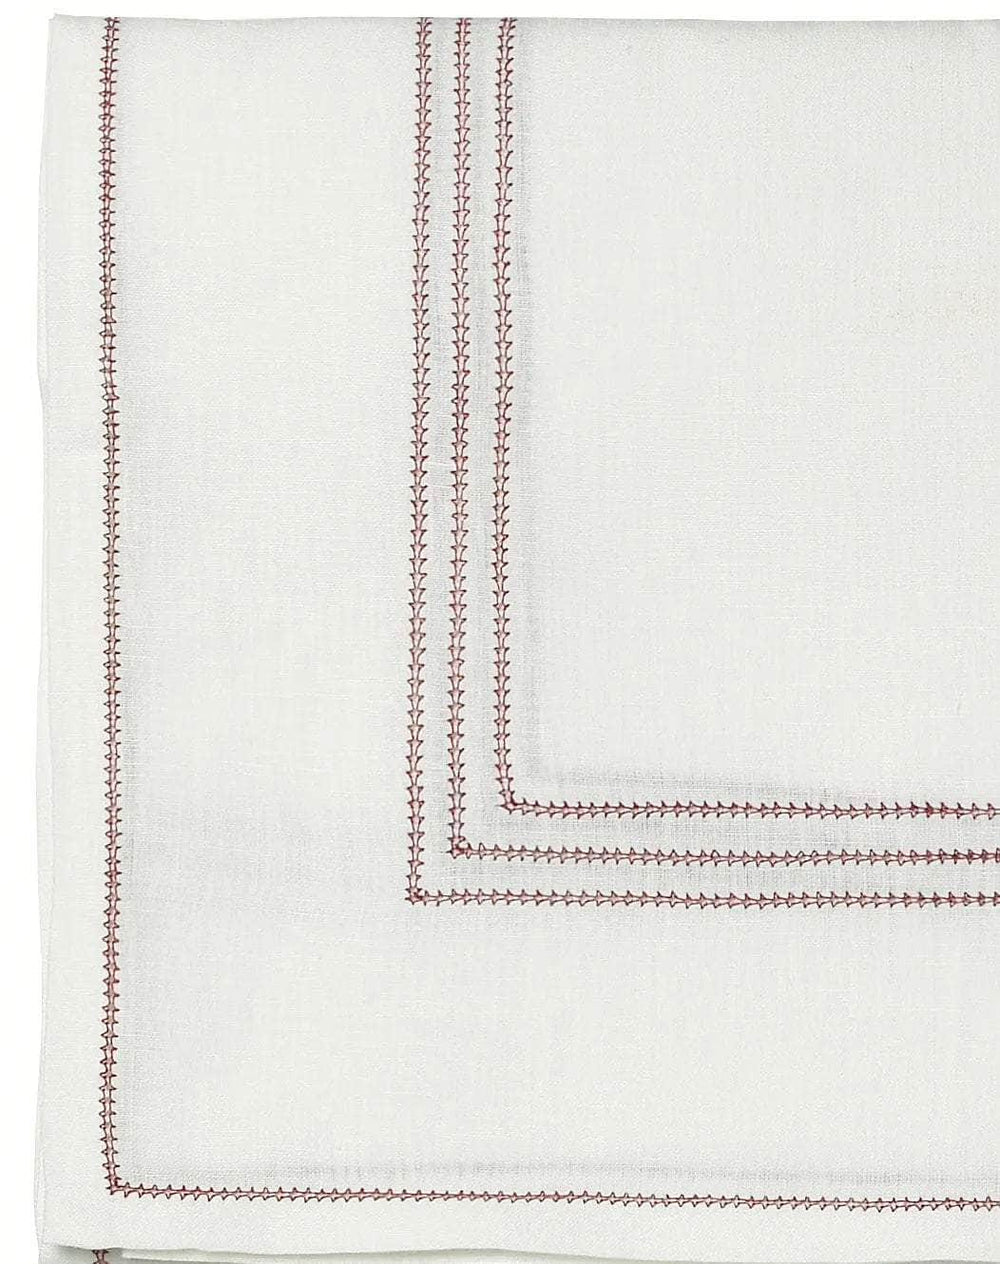 Tablecloth Hemstitch Red